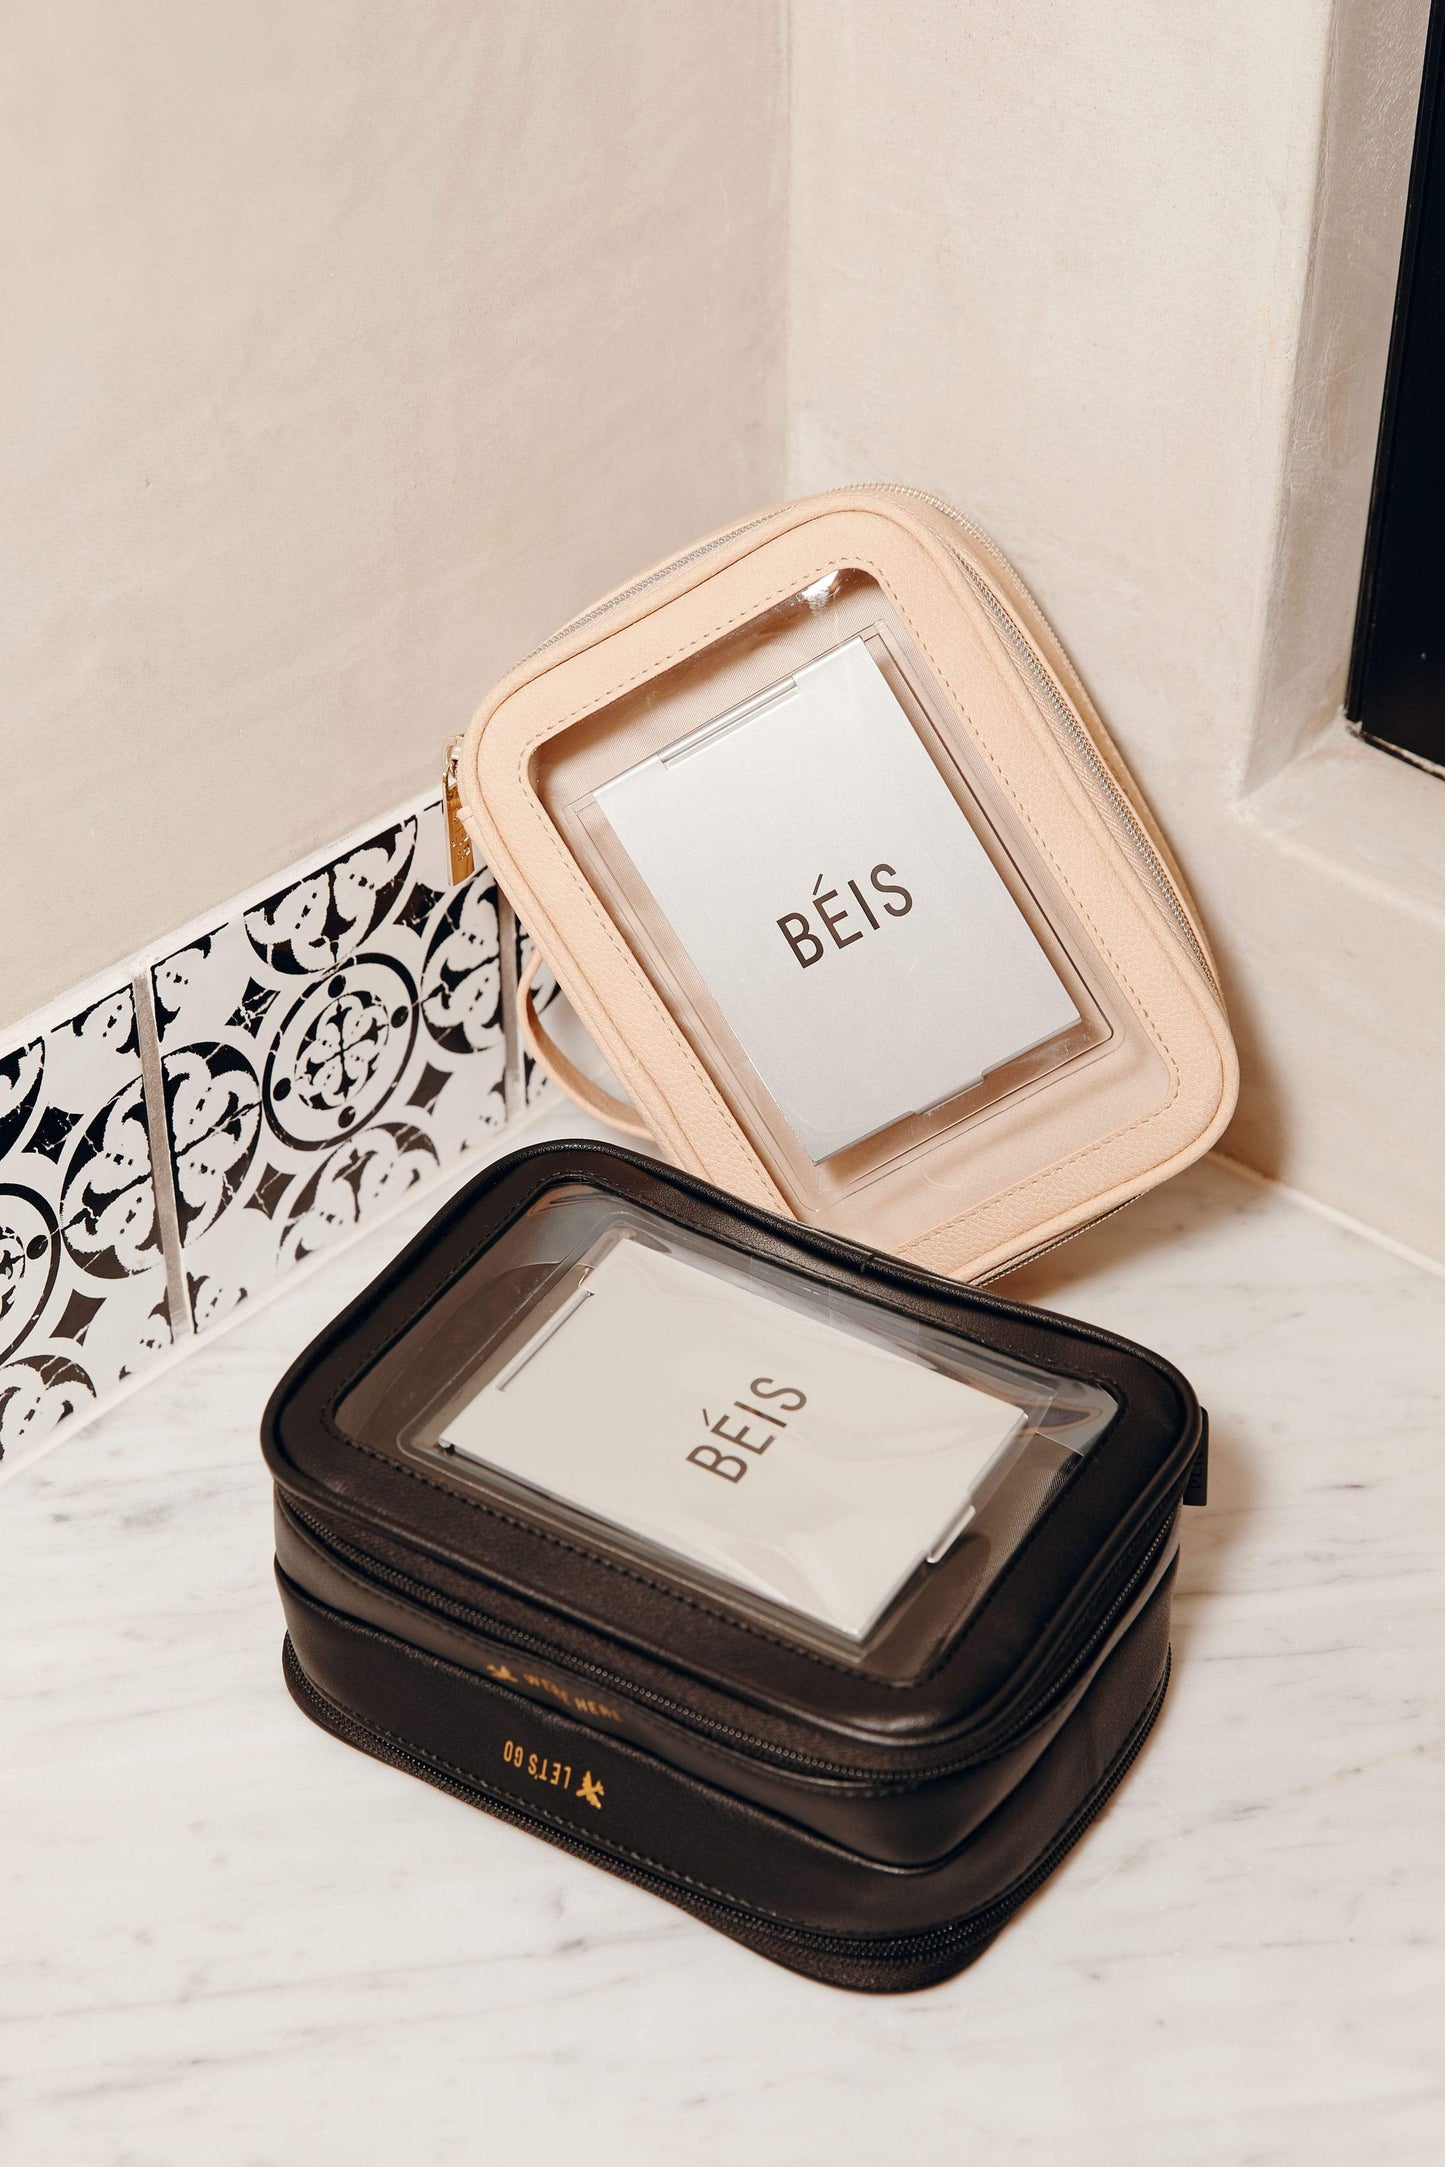 BEIS by Shay Mitchell | The On-The-Go Essential case in Black on marble countertop next to beige cosmetic case